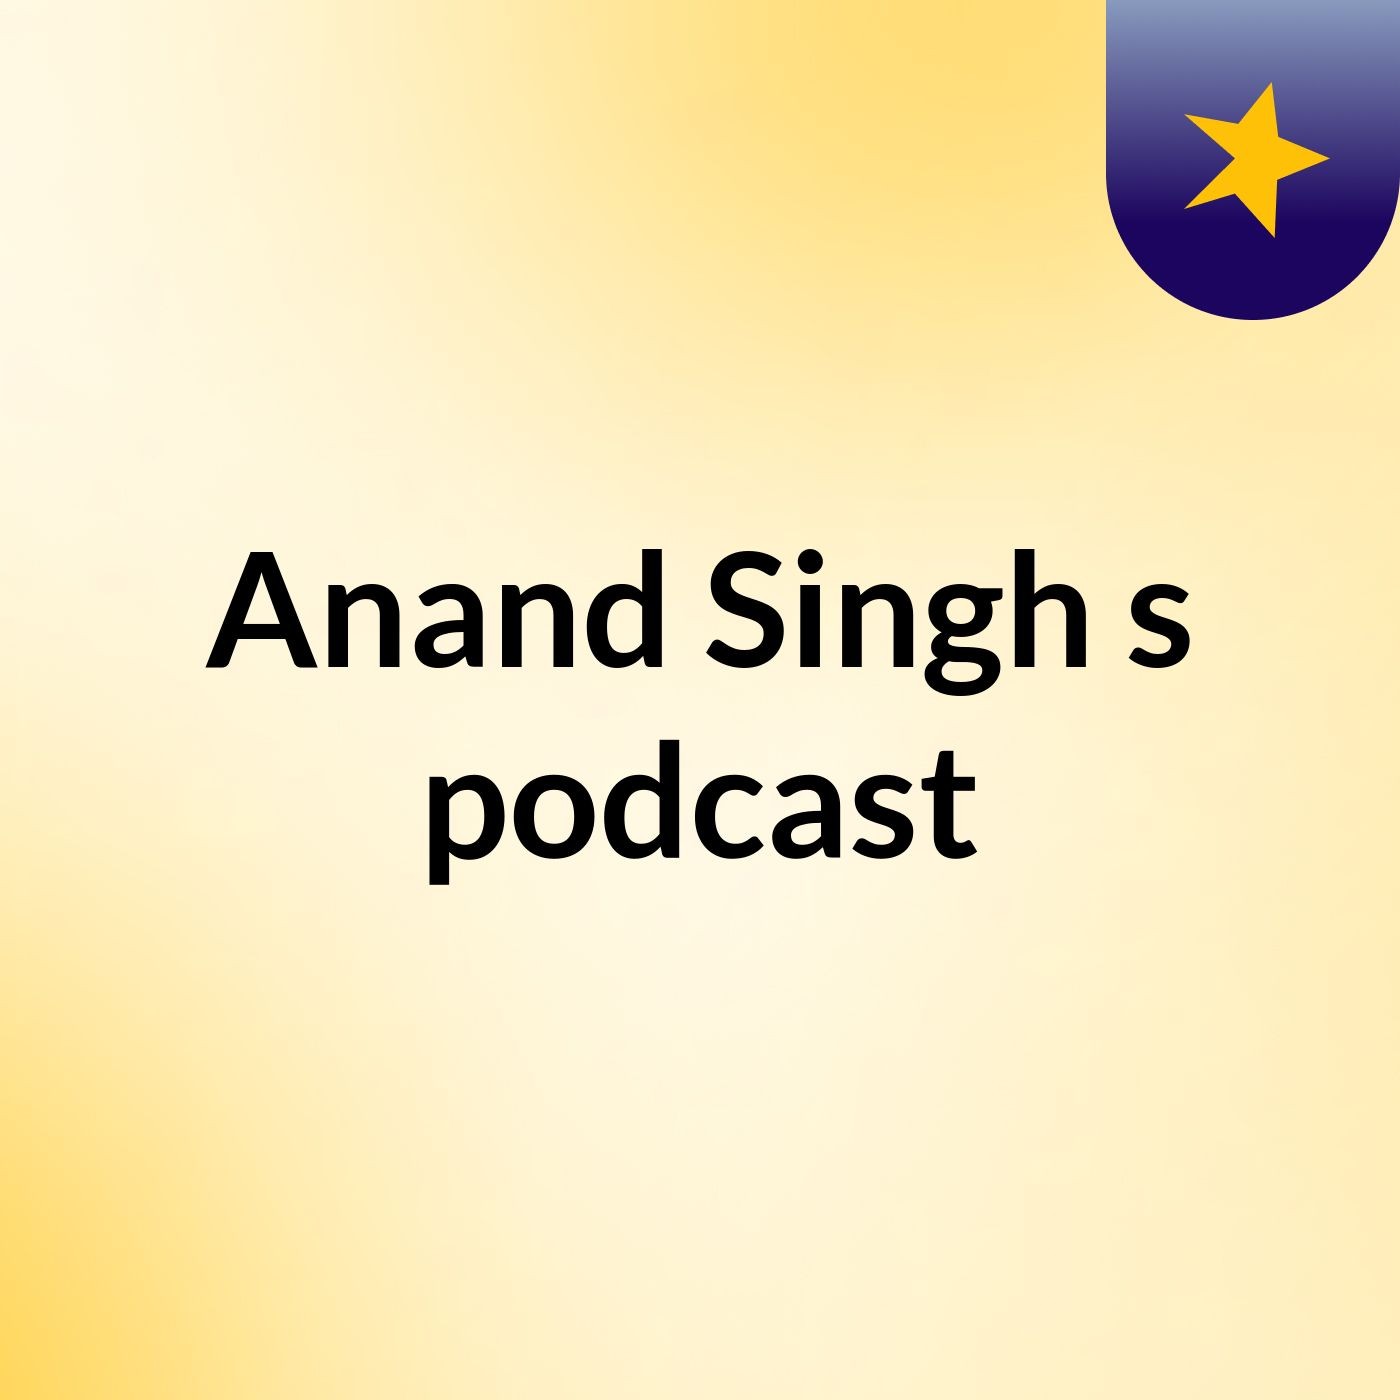 Anand Singh's podcast